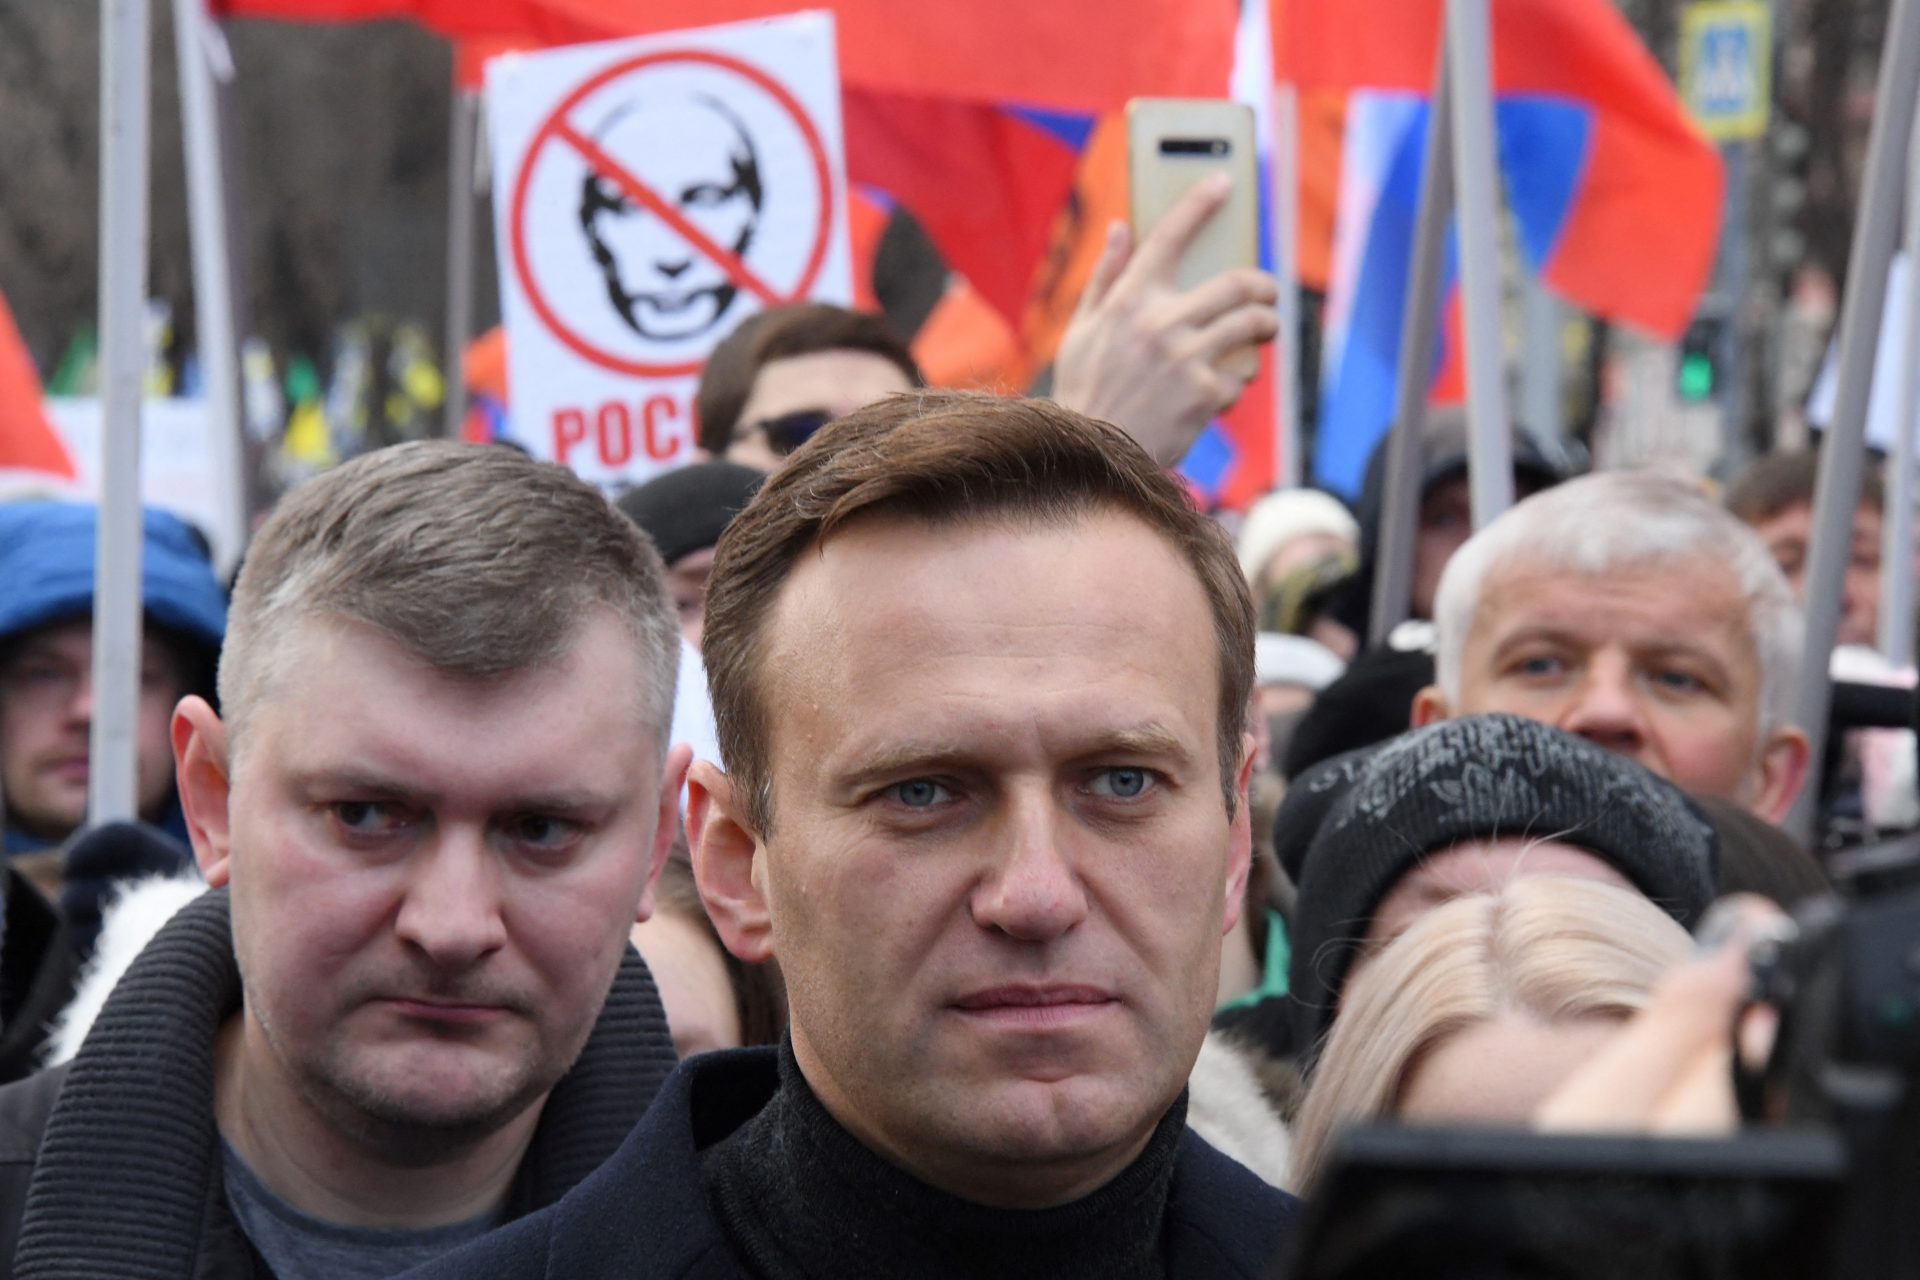 The face of Russian opposition